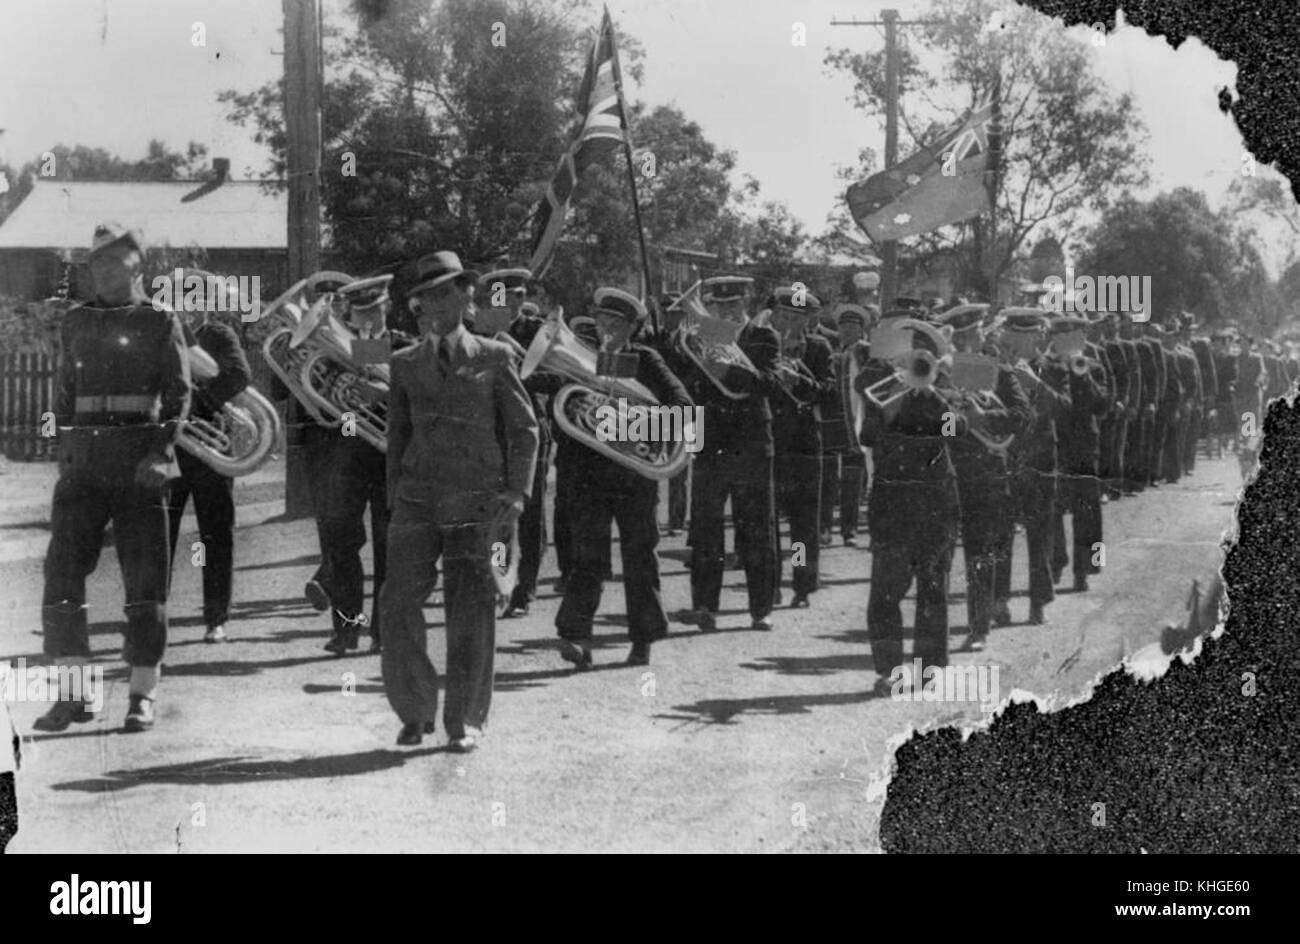 2 178031 Wondai Town Band marching on the first Anzac Day after World War II in Wooroolin, 1947 Stock Photo